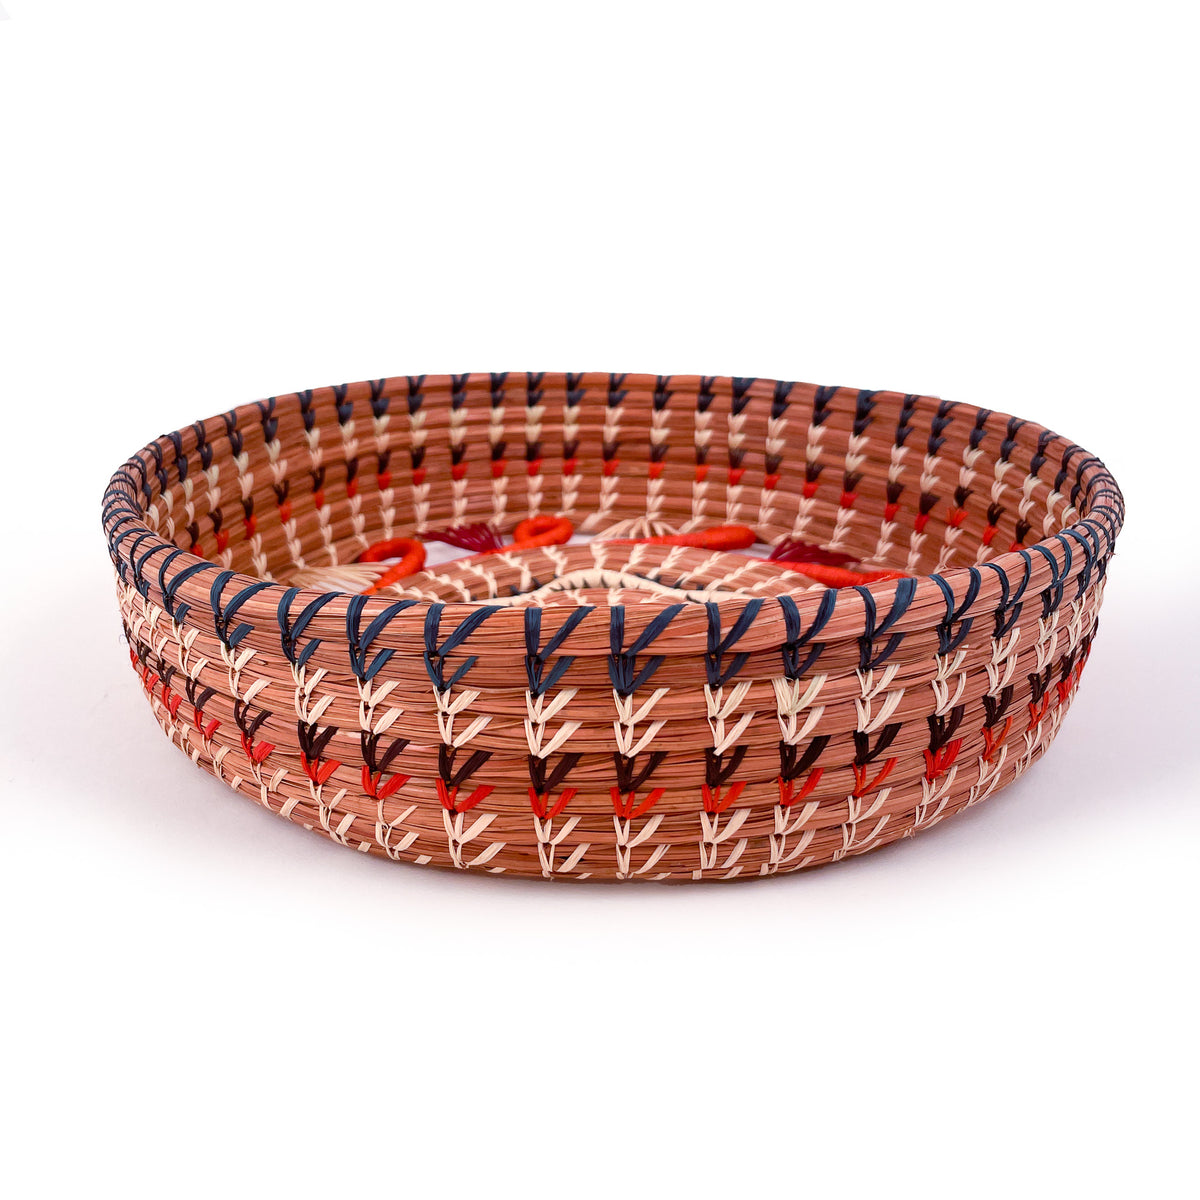 Side view of basket, showing raffia stitching in blue, natural, brown, and orange